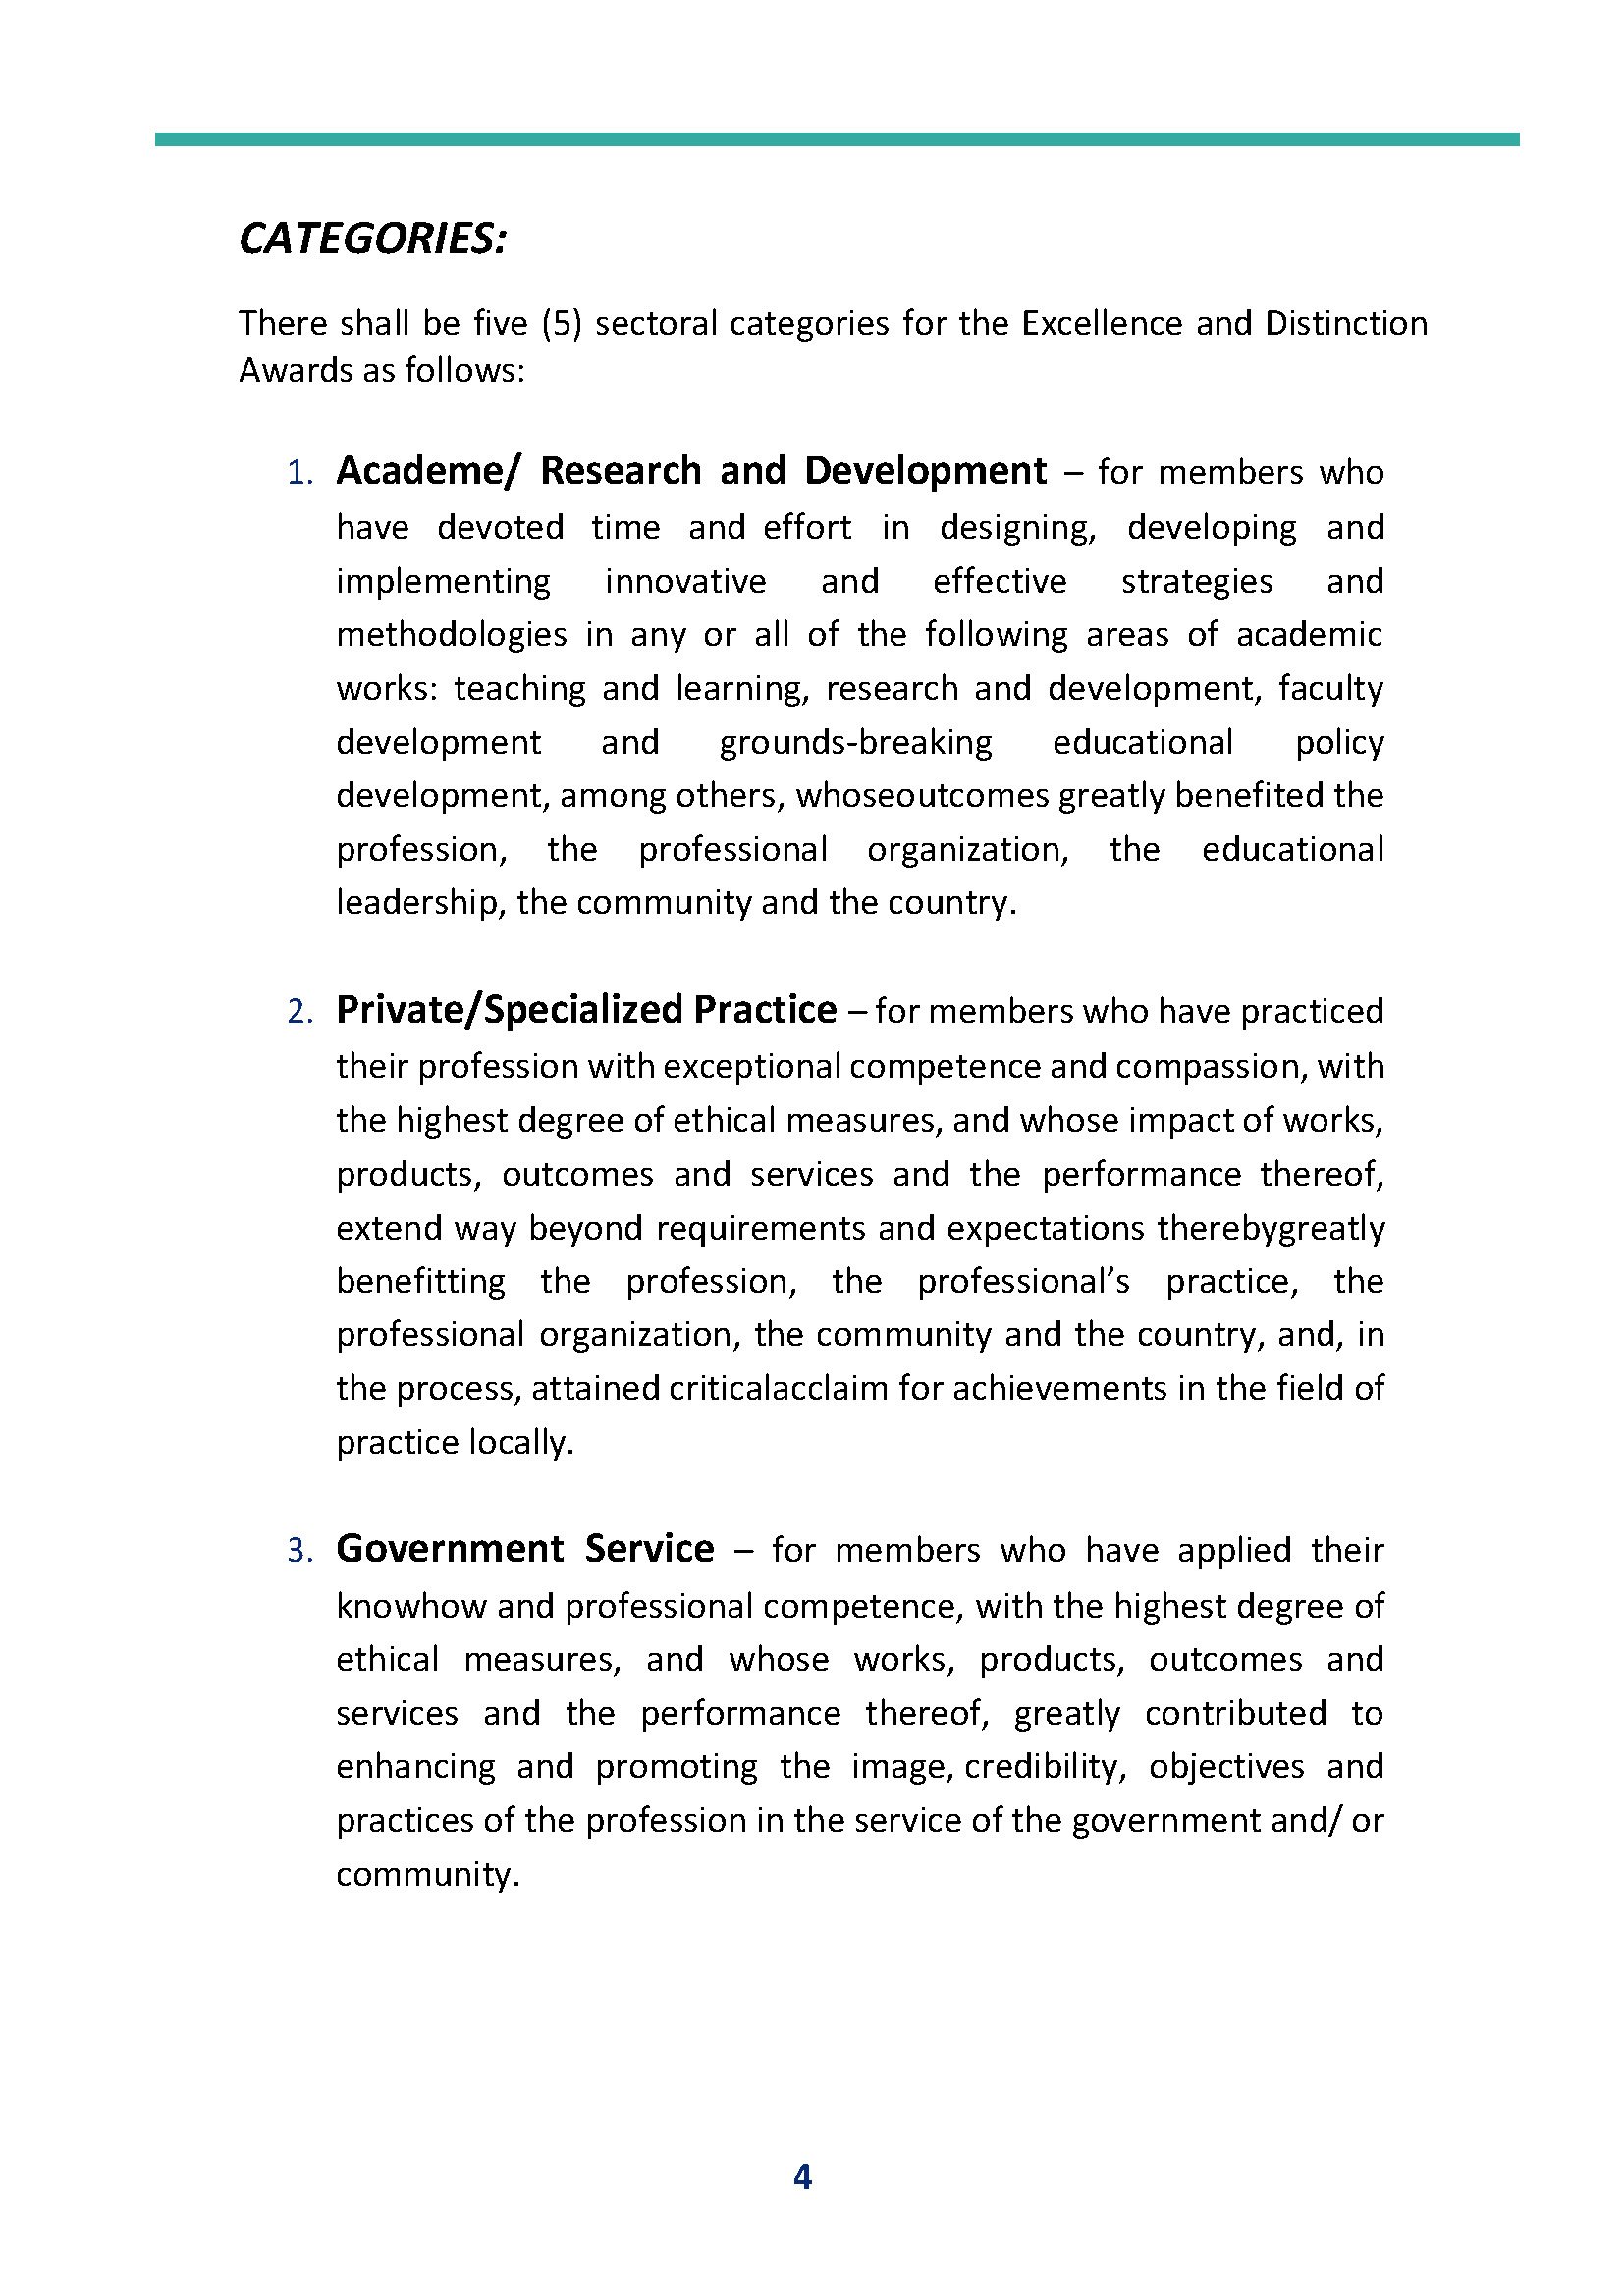 PFPA-Excellence-Awards-Guidelines-new (1)_Page_04.jpg